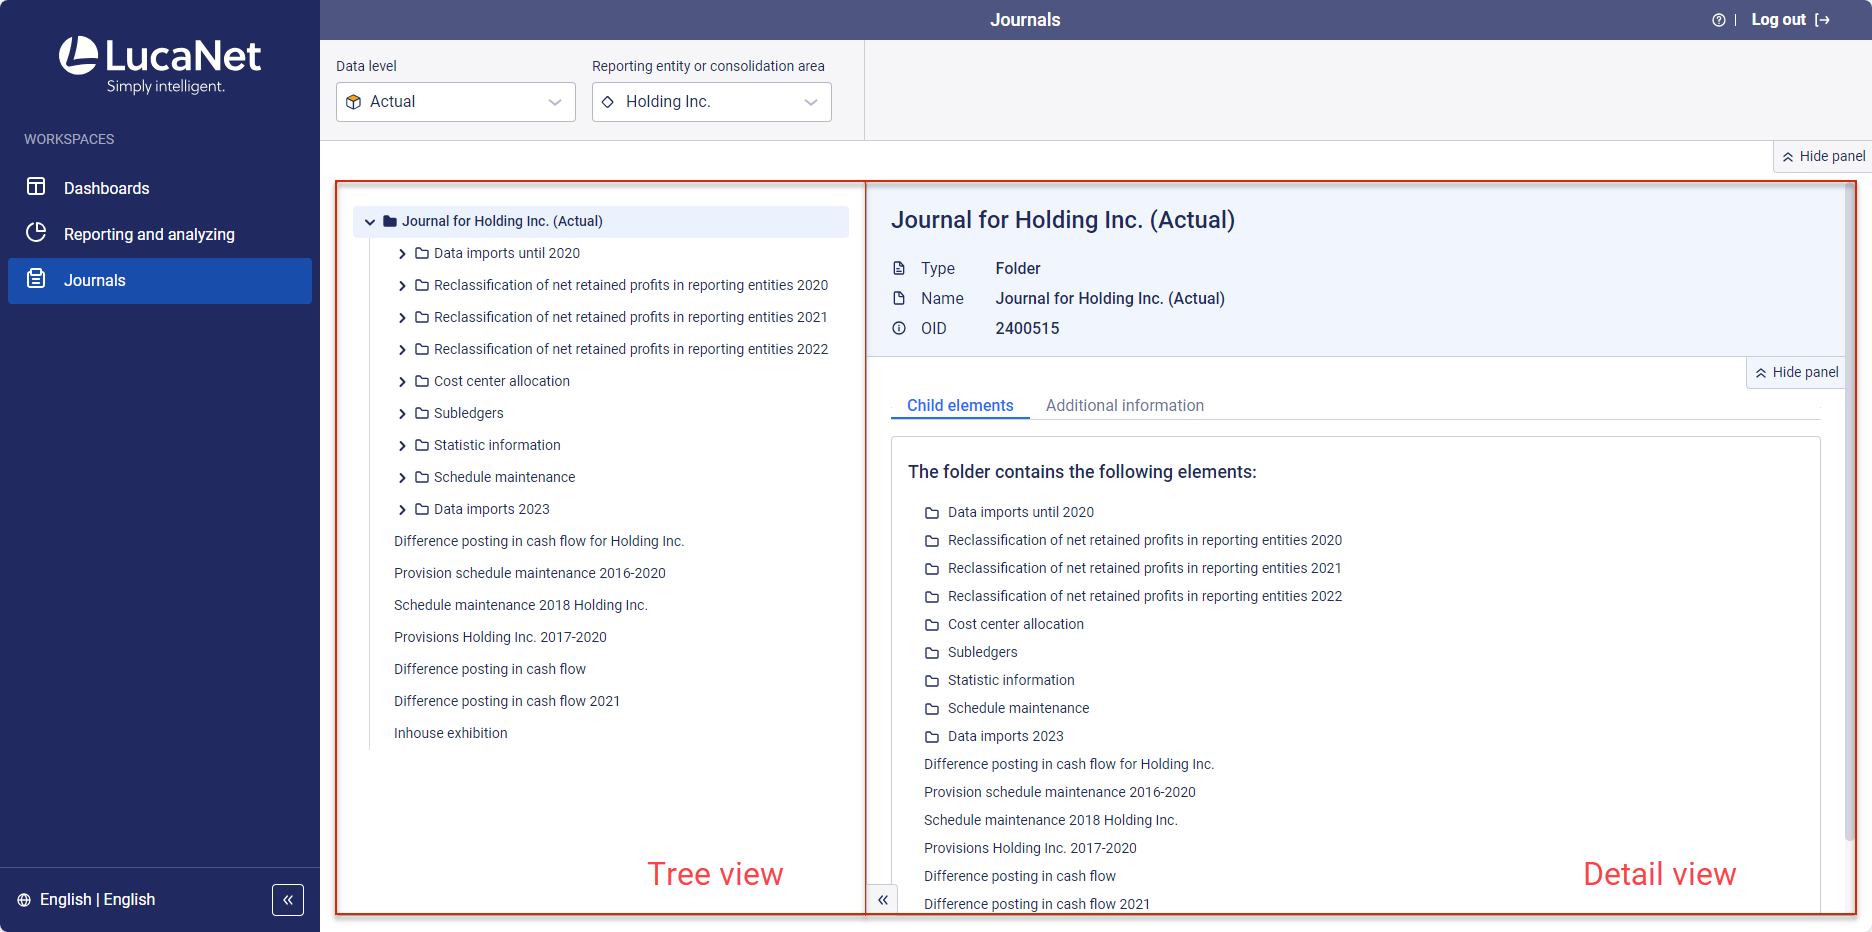 The workspace 'Journals' is displayed with the corresponding tree view (left) and detail view (right).